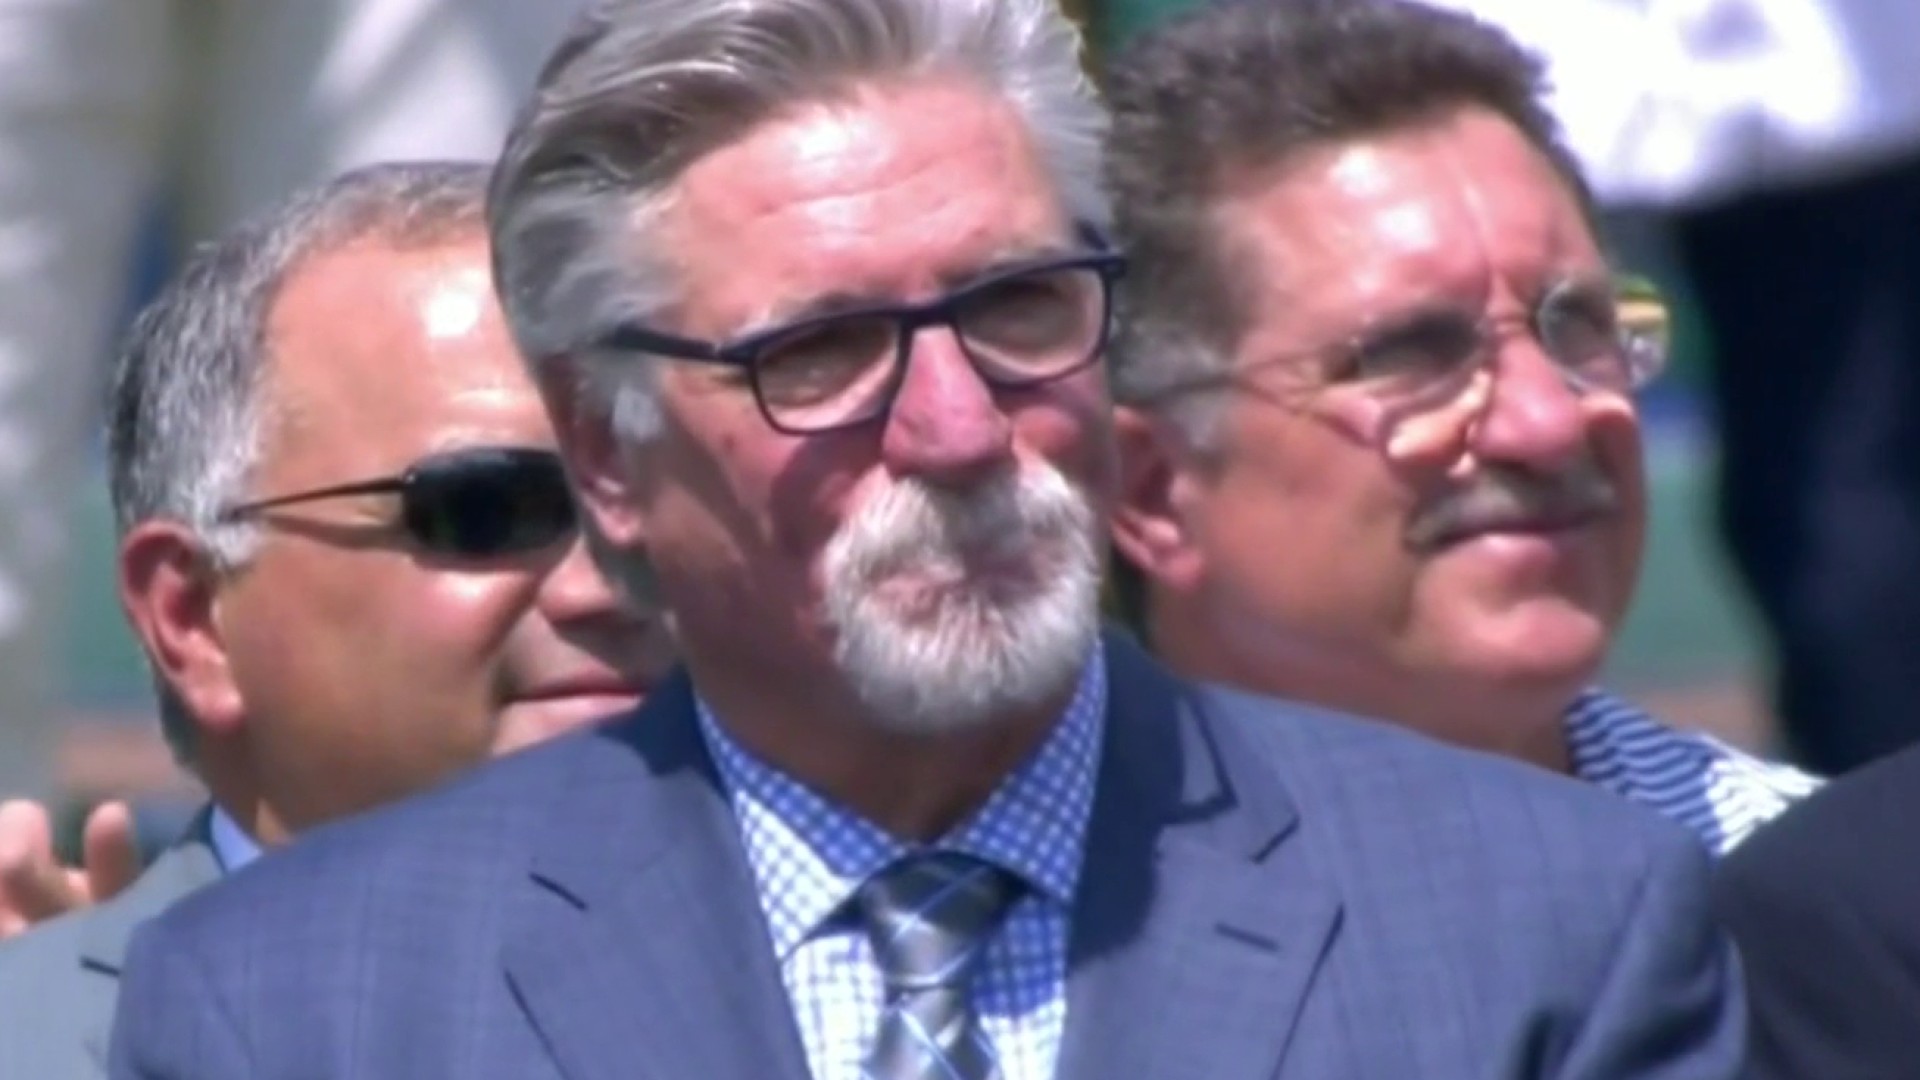 Jack Morris suspended for comment about Shohei Ohtani